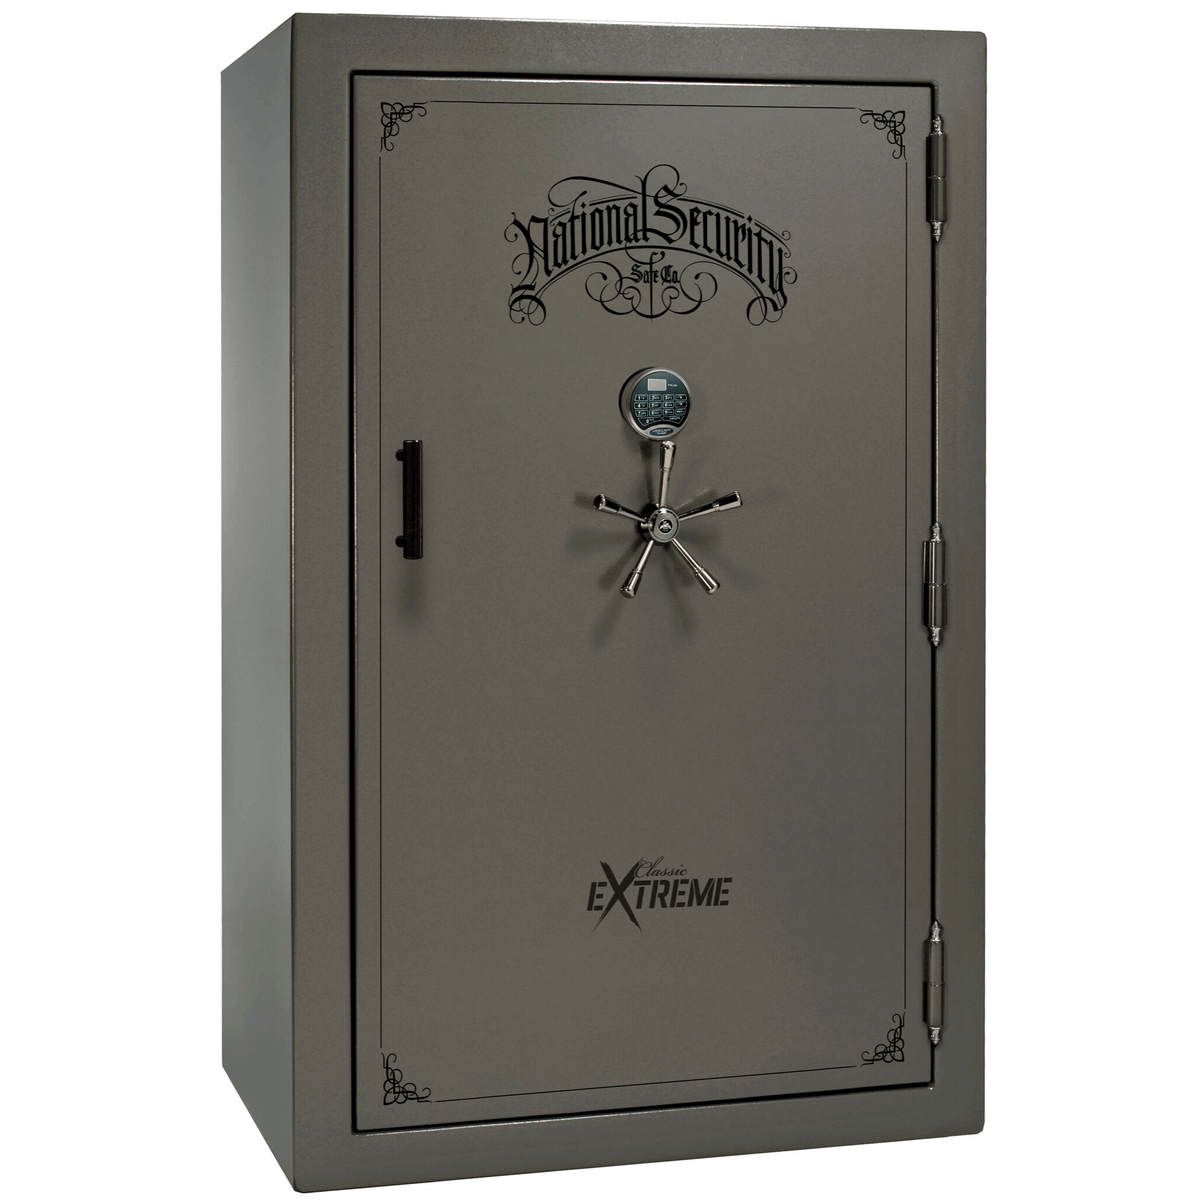 Classic extreme series | level 6 security | 90 minute fire protection - Gray Marble - Electronic - MODLOCK